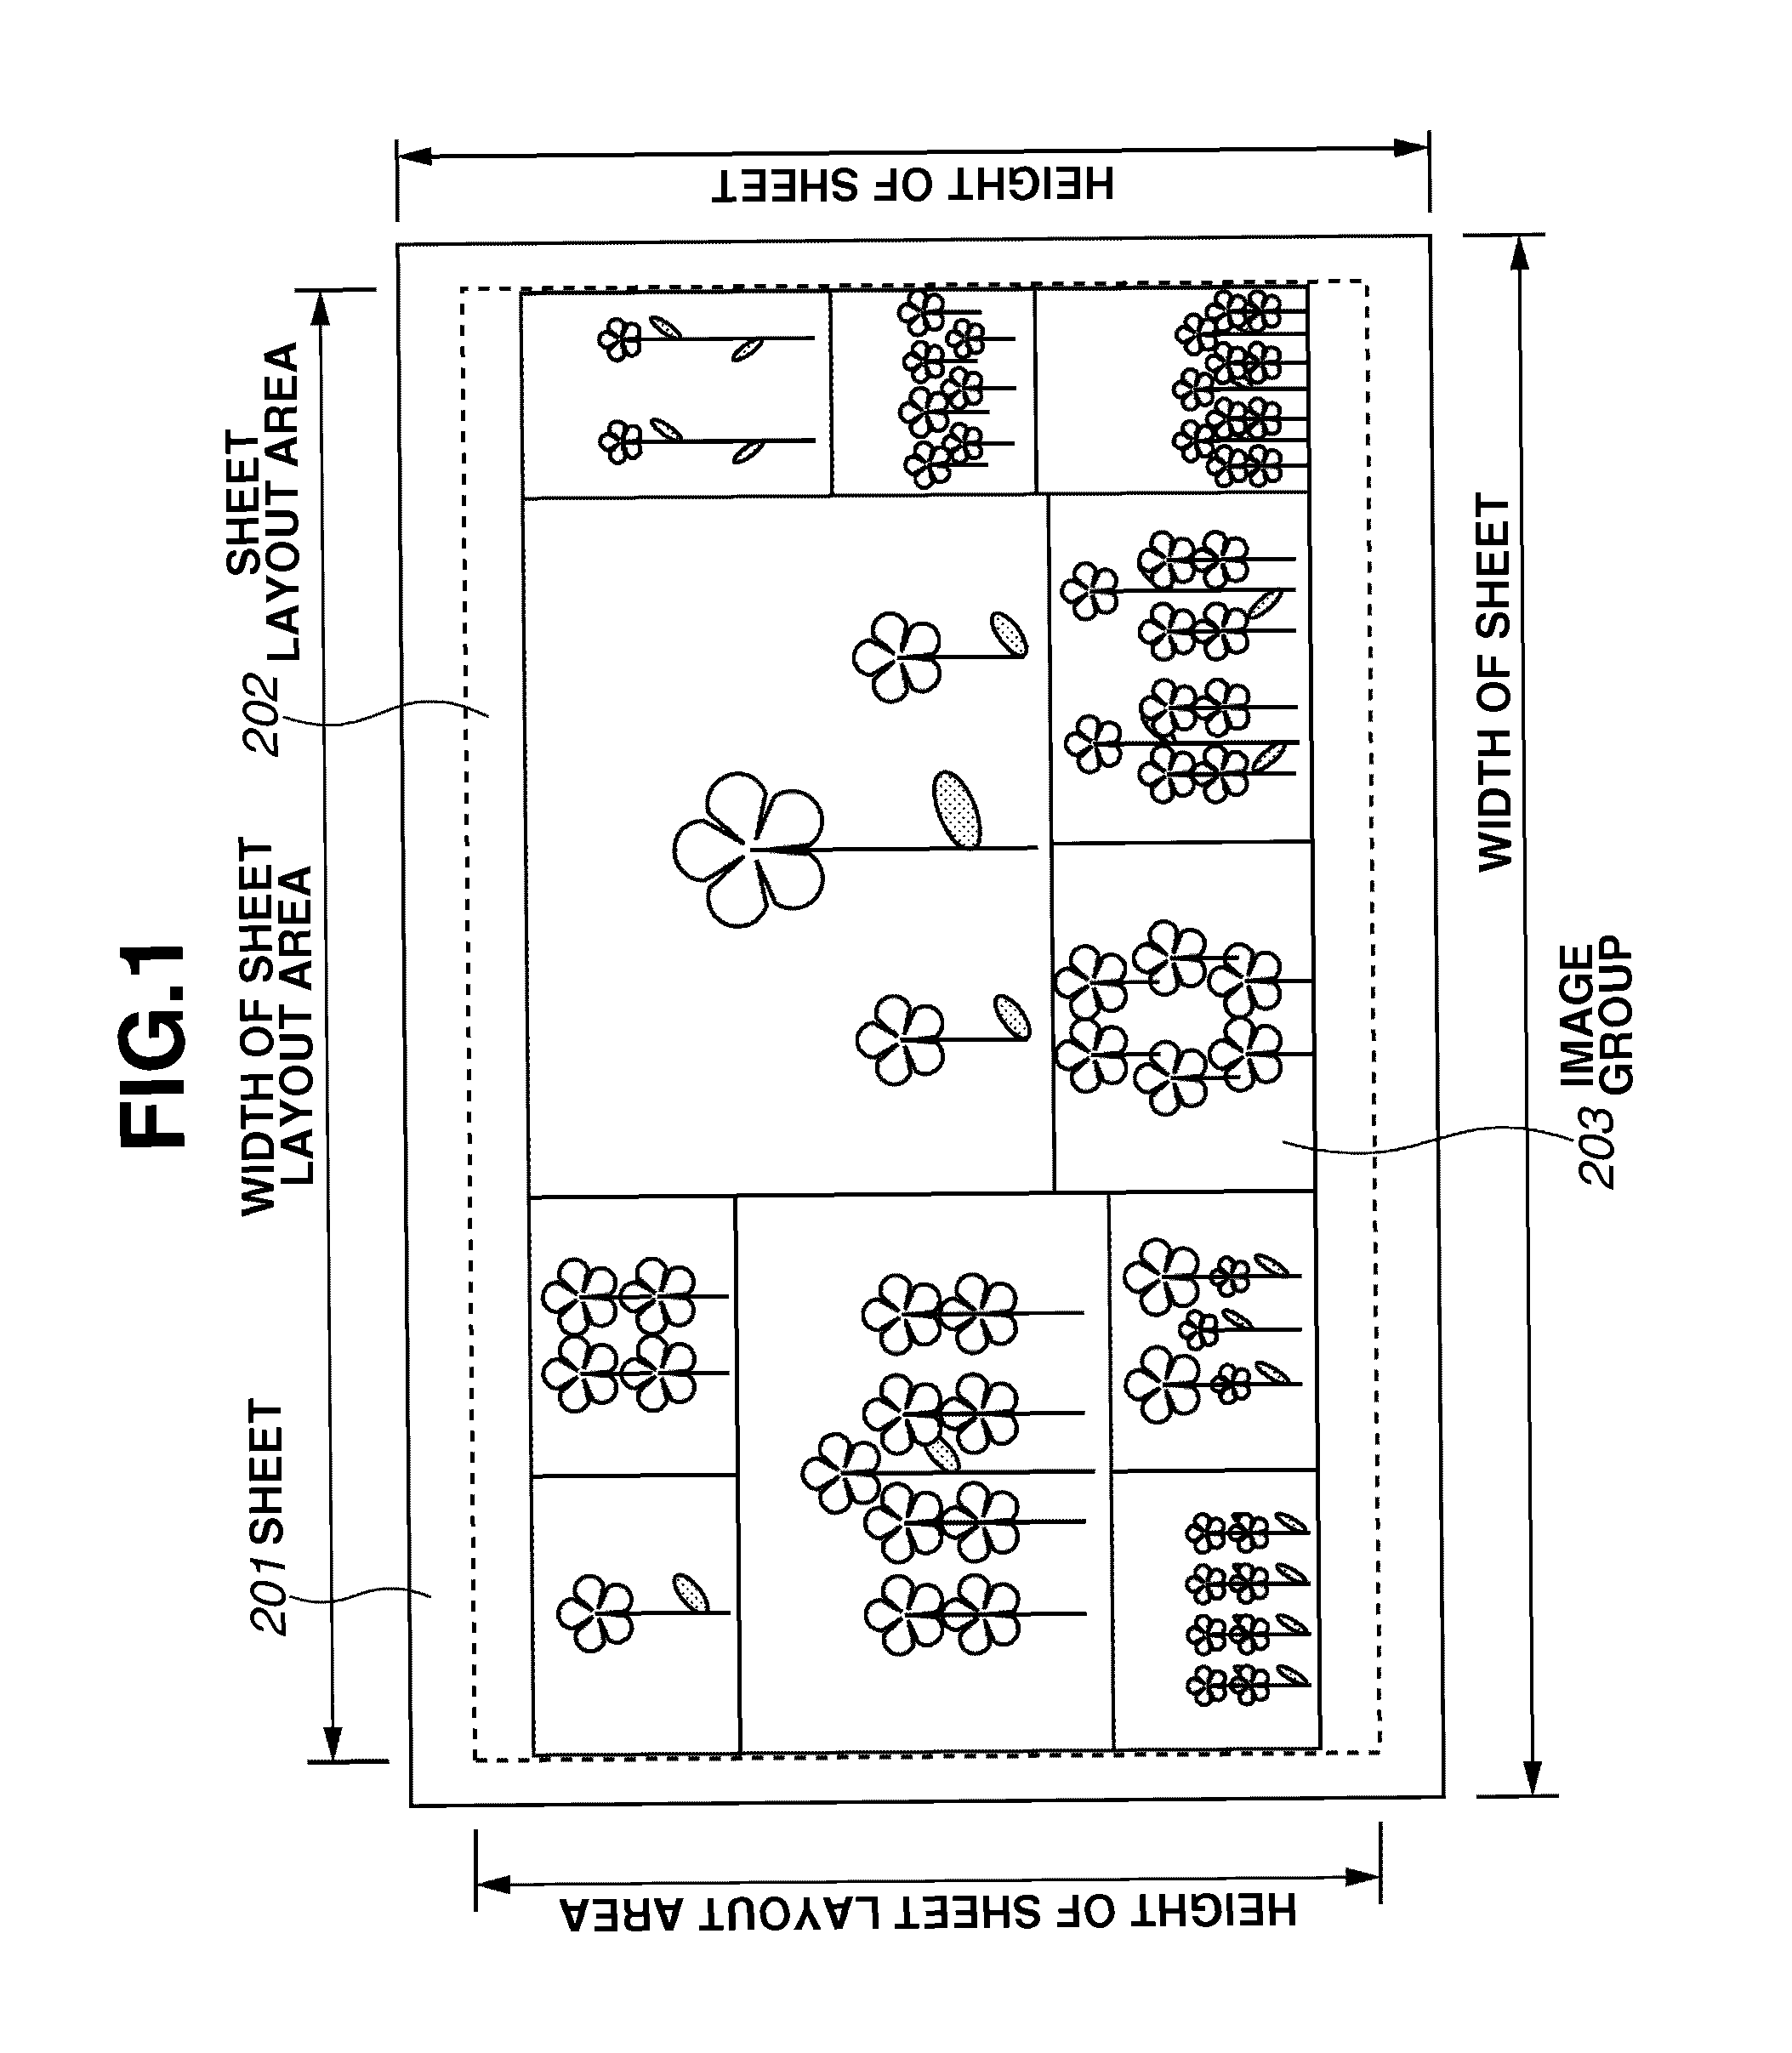 Image processing apparatus and method for controlling the image processing apparatus